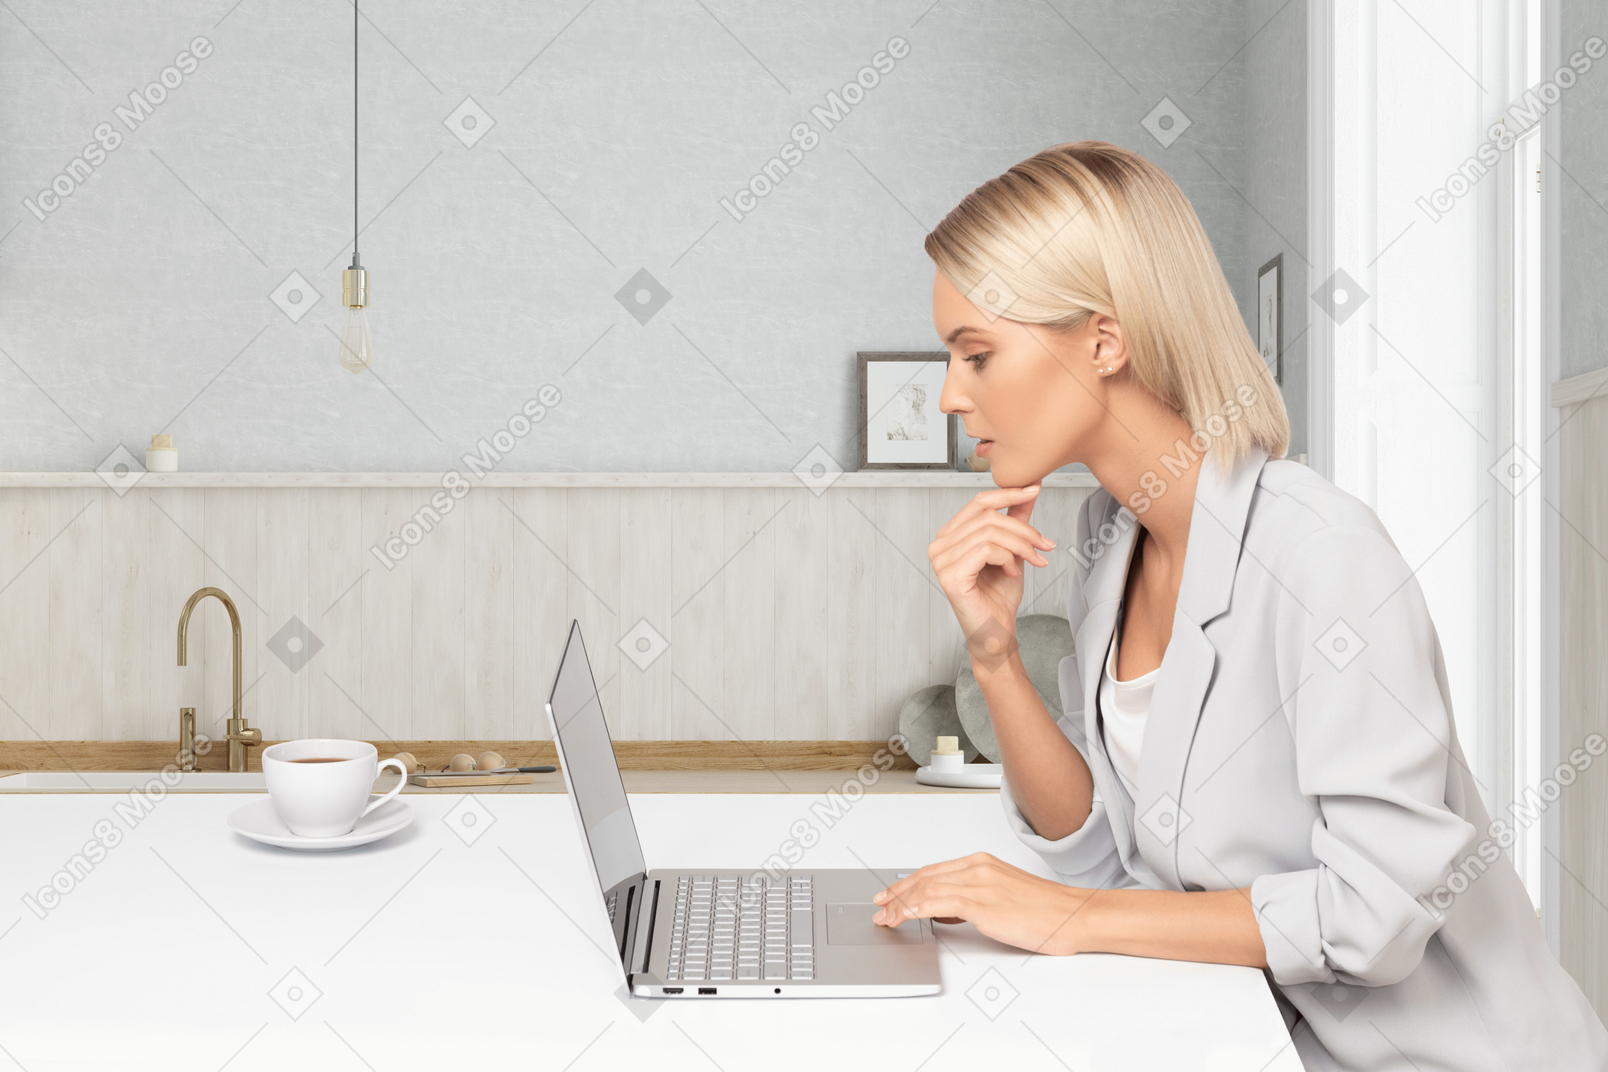 A woman working on a laptop in a kitchen